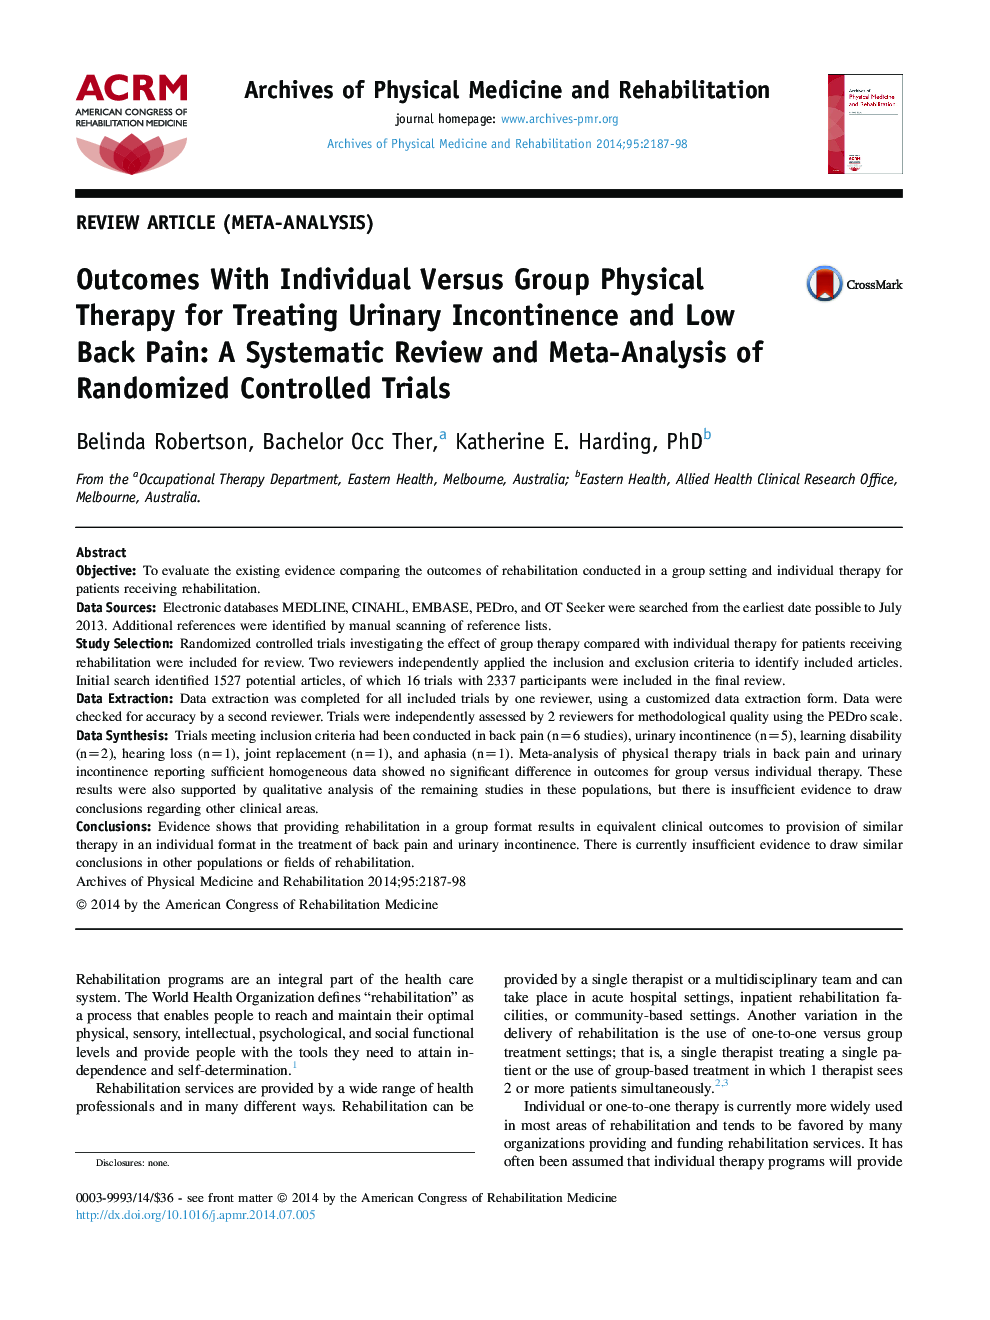 Outcomes With Individual Versus Group Physical Therapy for Treating Urinary Incontinence and Low Back Pain: A Systematic Review and Meta-Analysis of Randomized Controlled Trials 